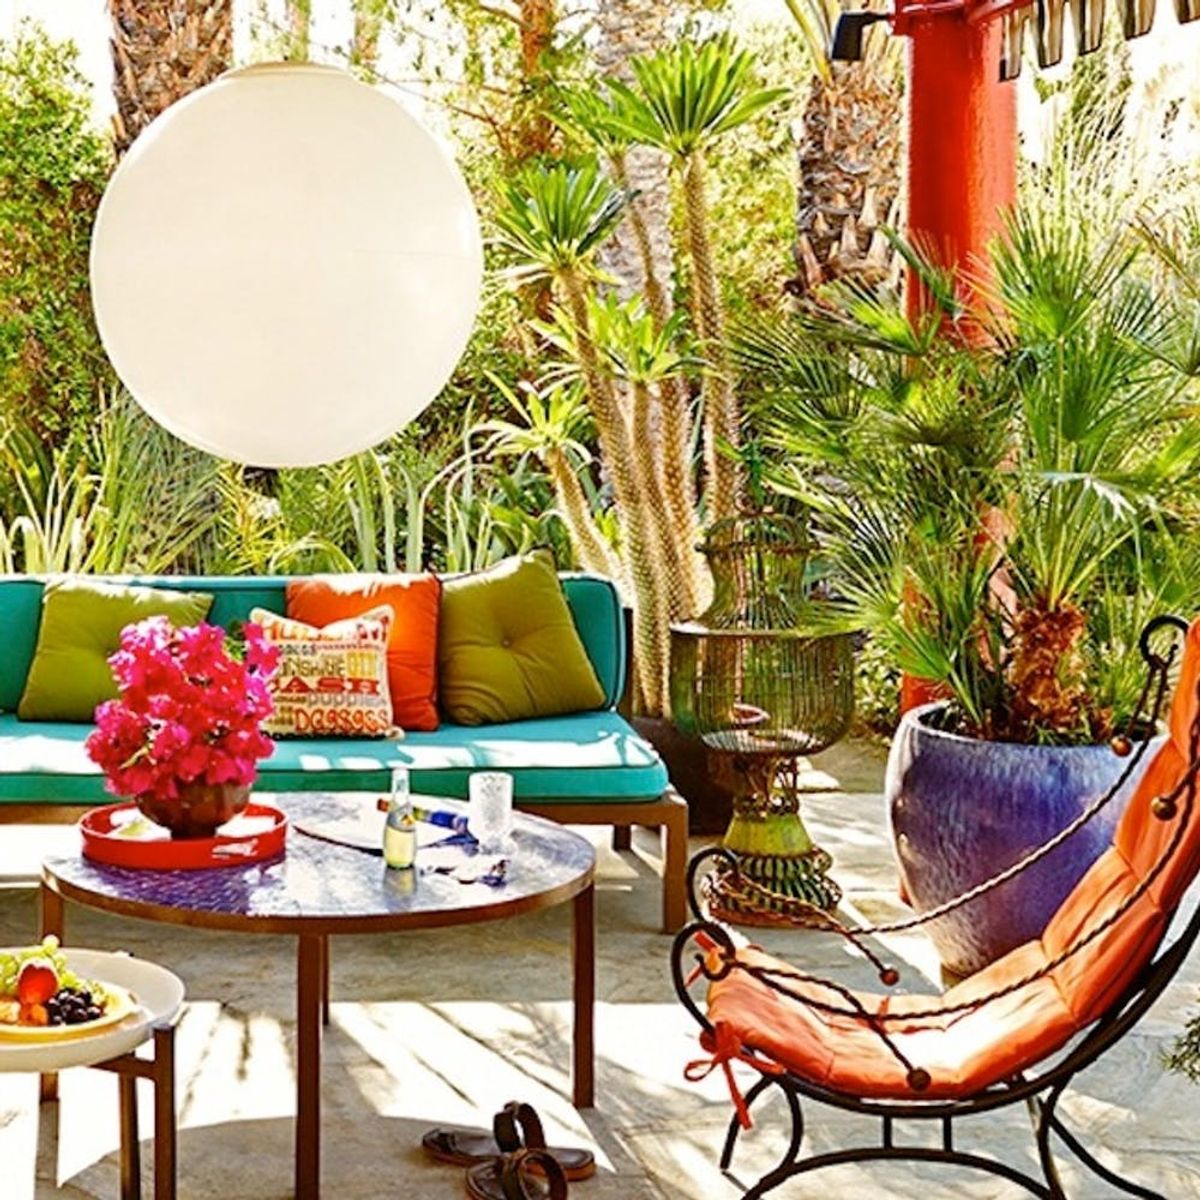 19 Patios You’ll Want to Live on This Summer